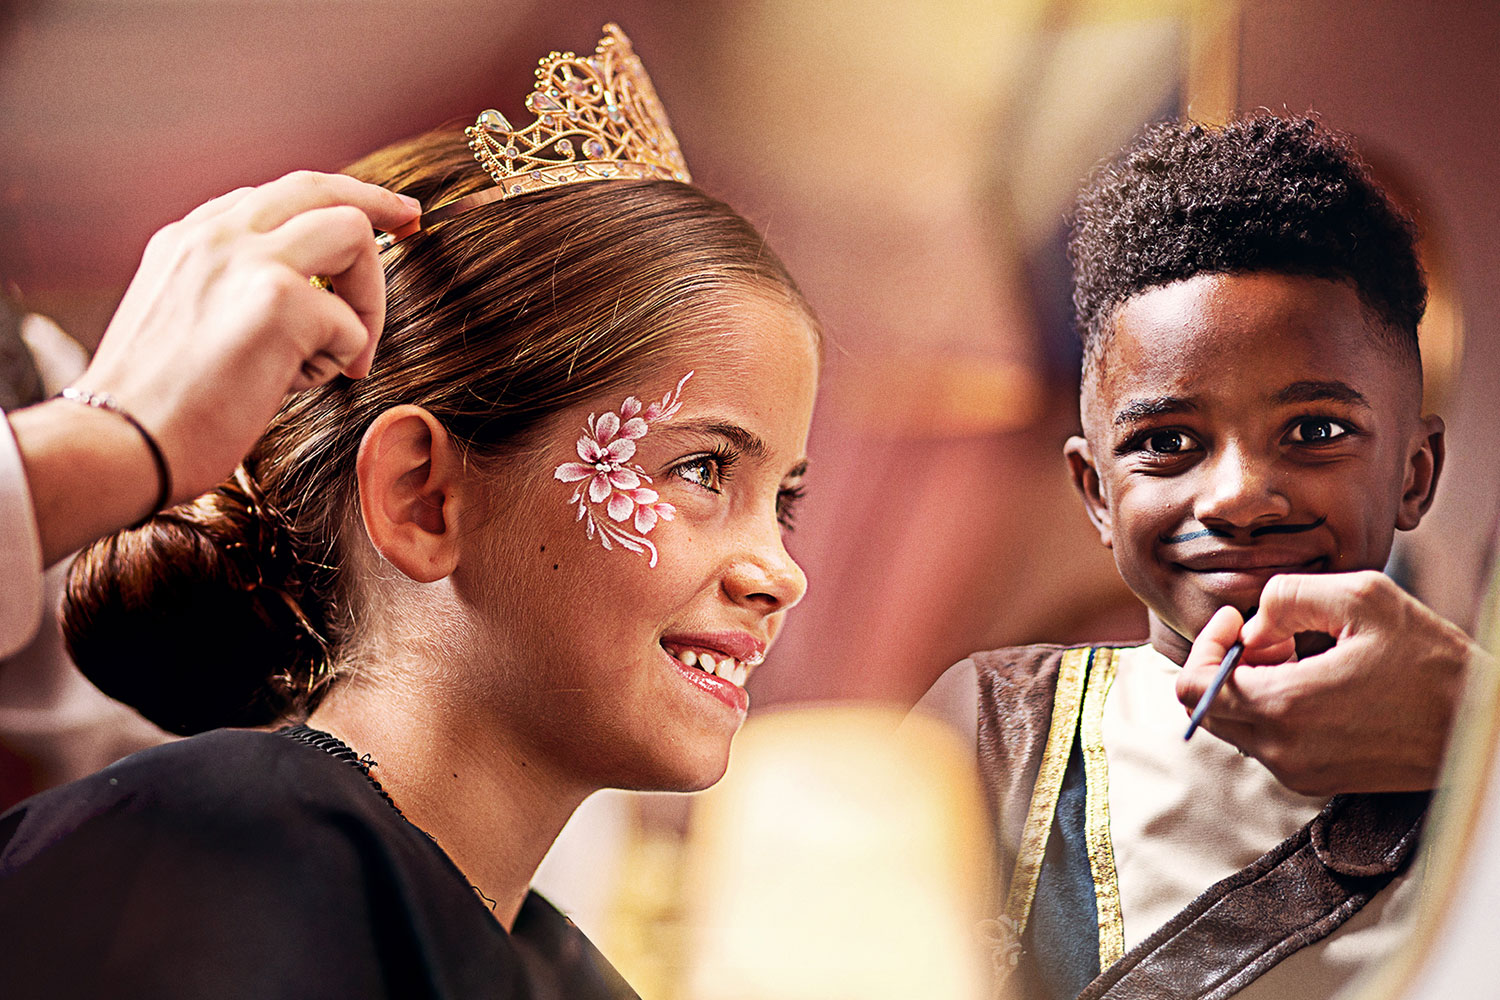 Disneyland Hotel: A Royal Experience For The Children at Disneyland Paris